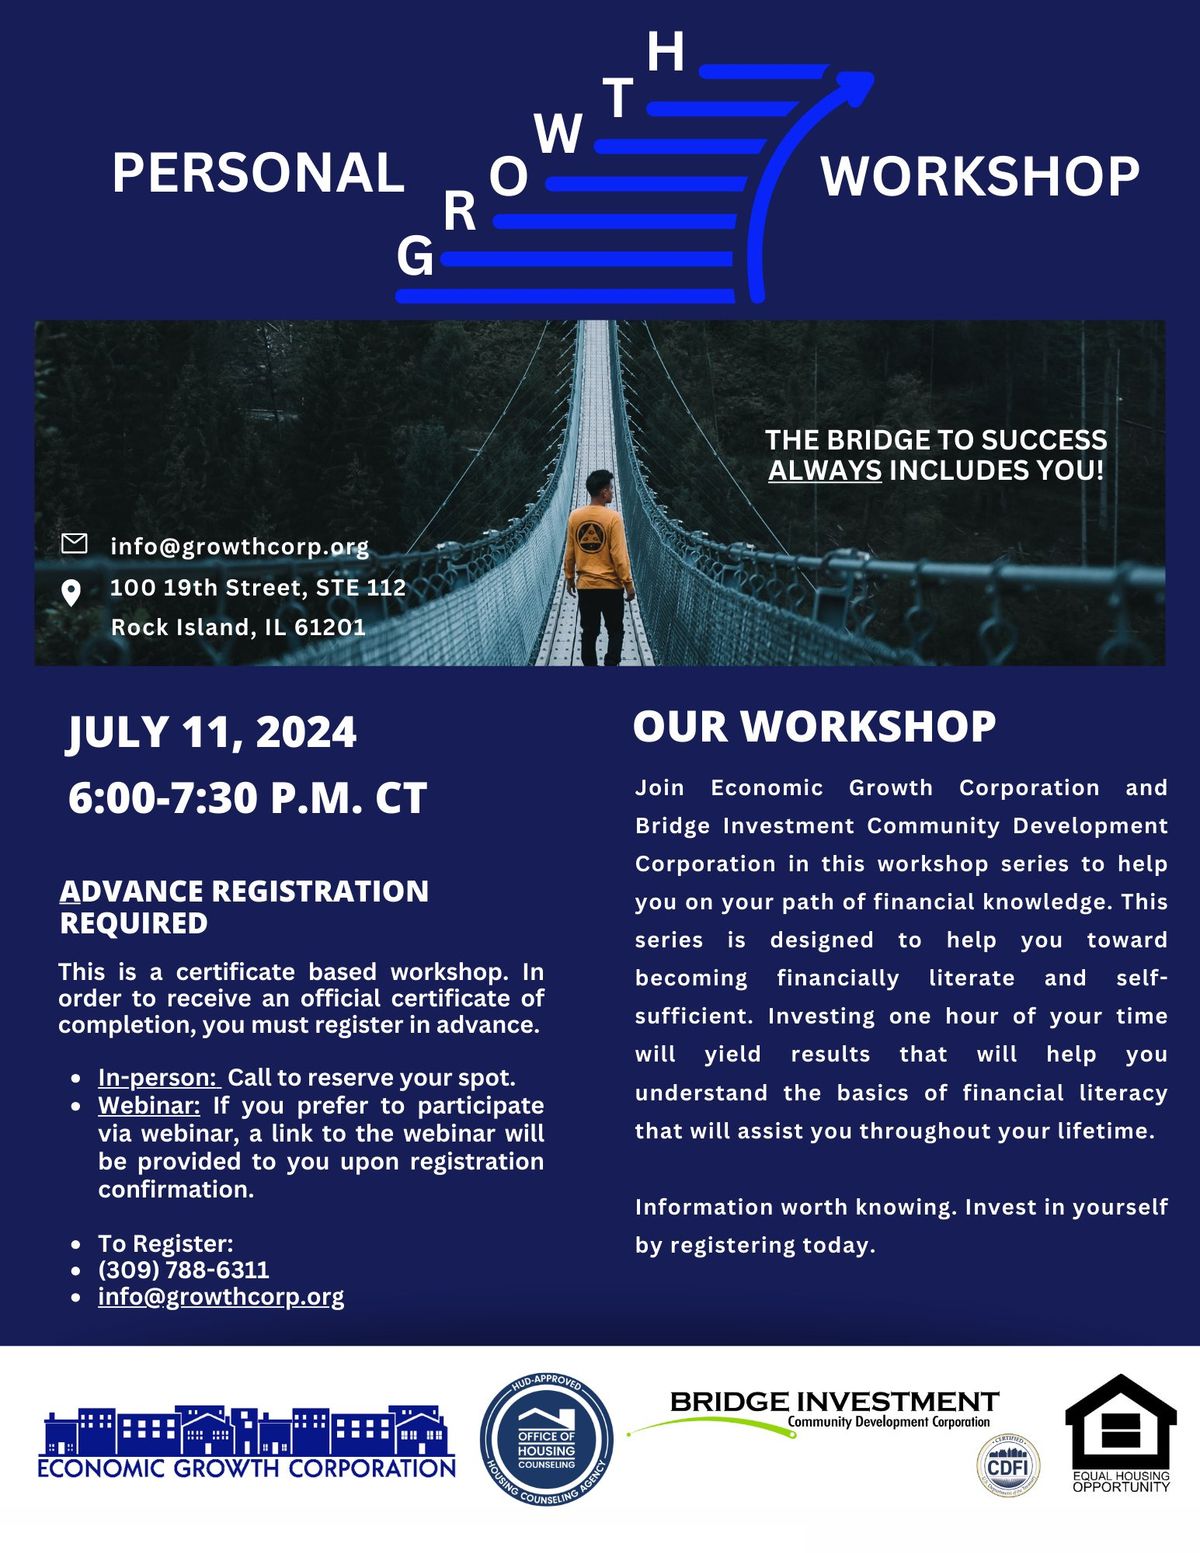 Personal Growth Workshop  | Improving your personal finances and increasing your financial stability